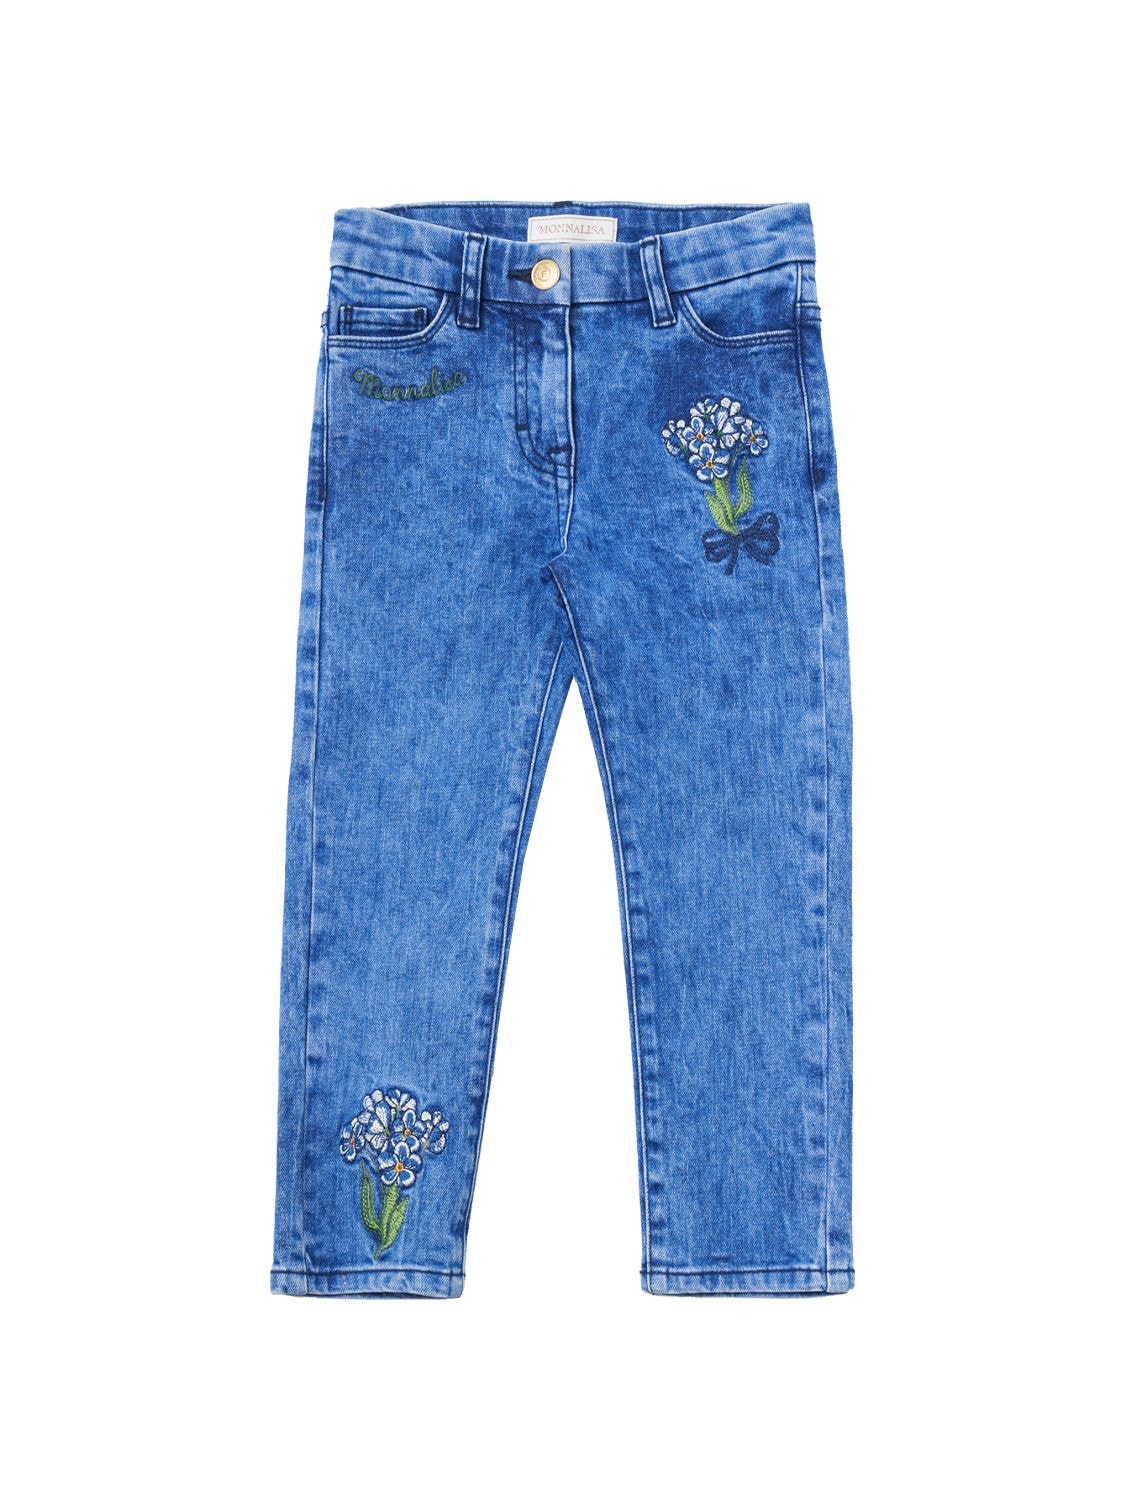 Image of Stretch Cotton Denim Jeans W/patches